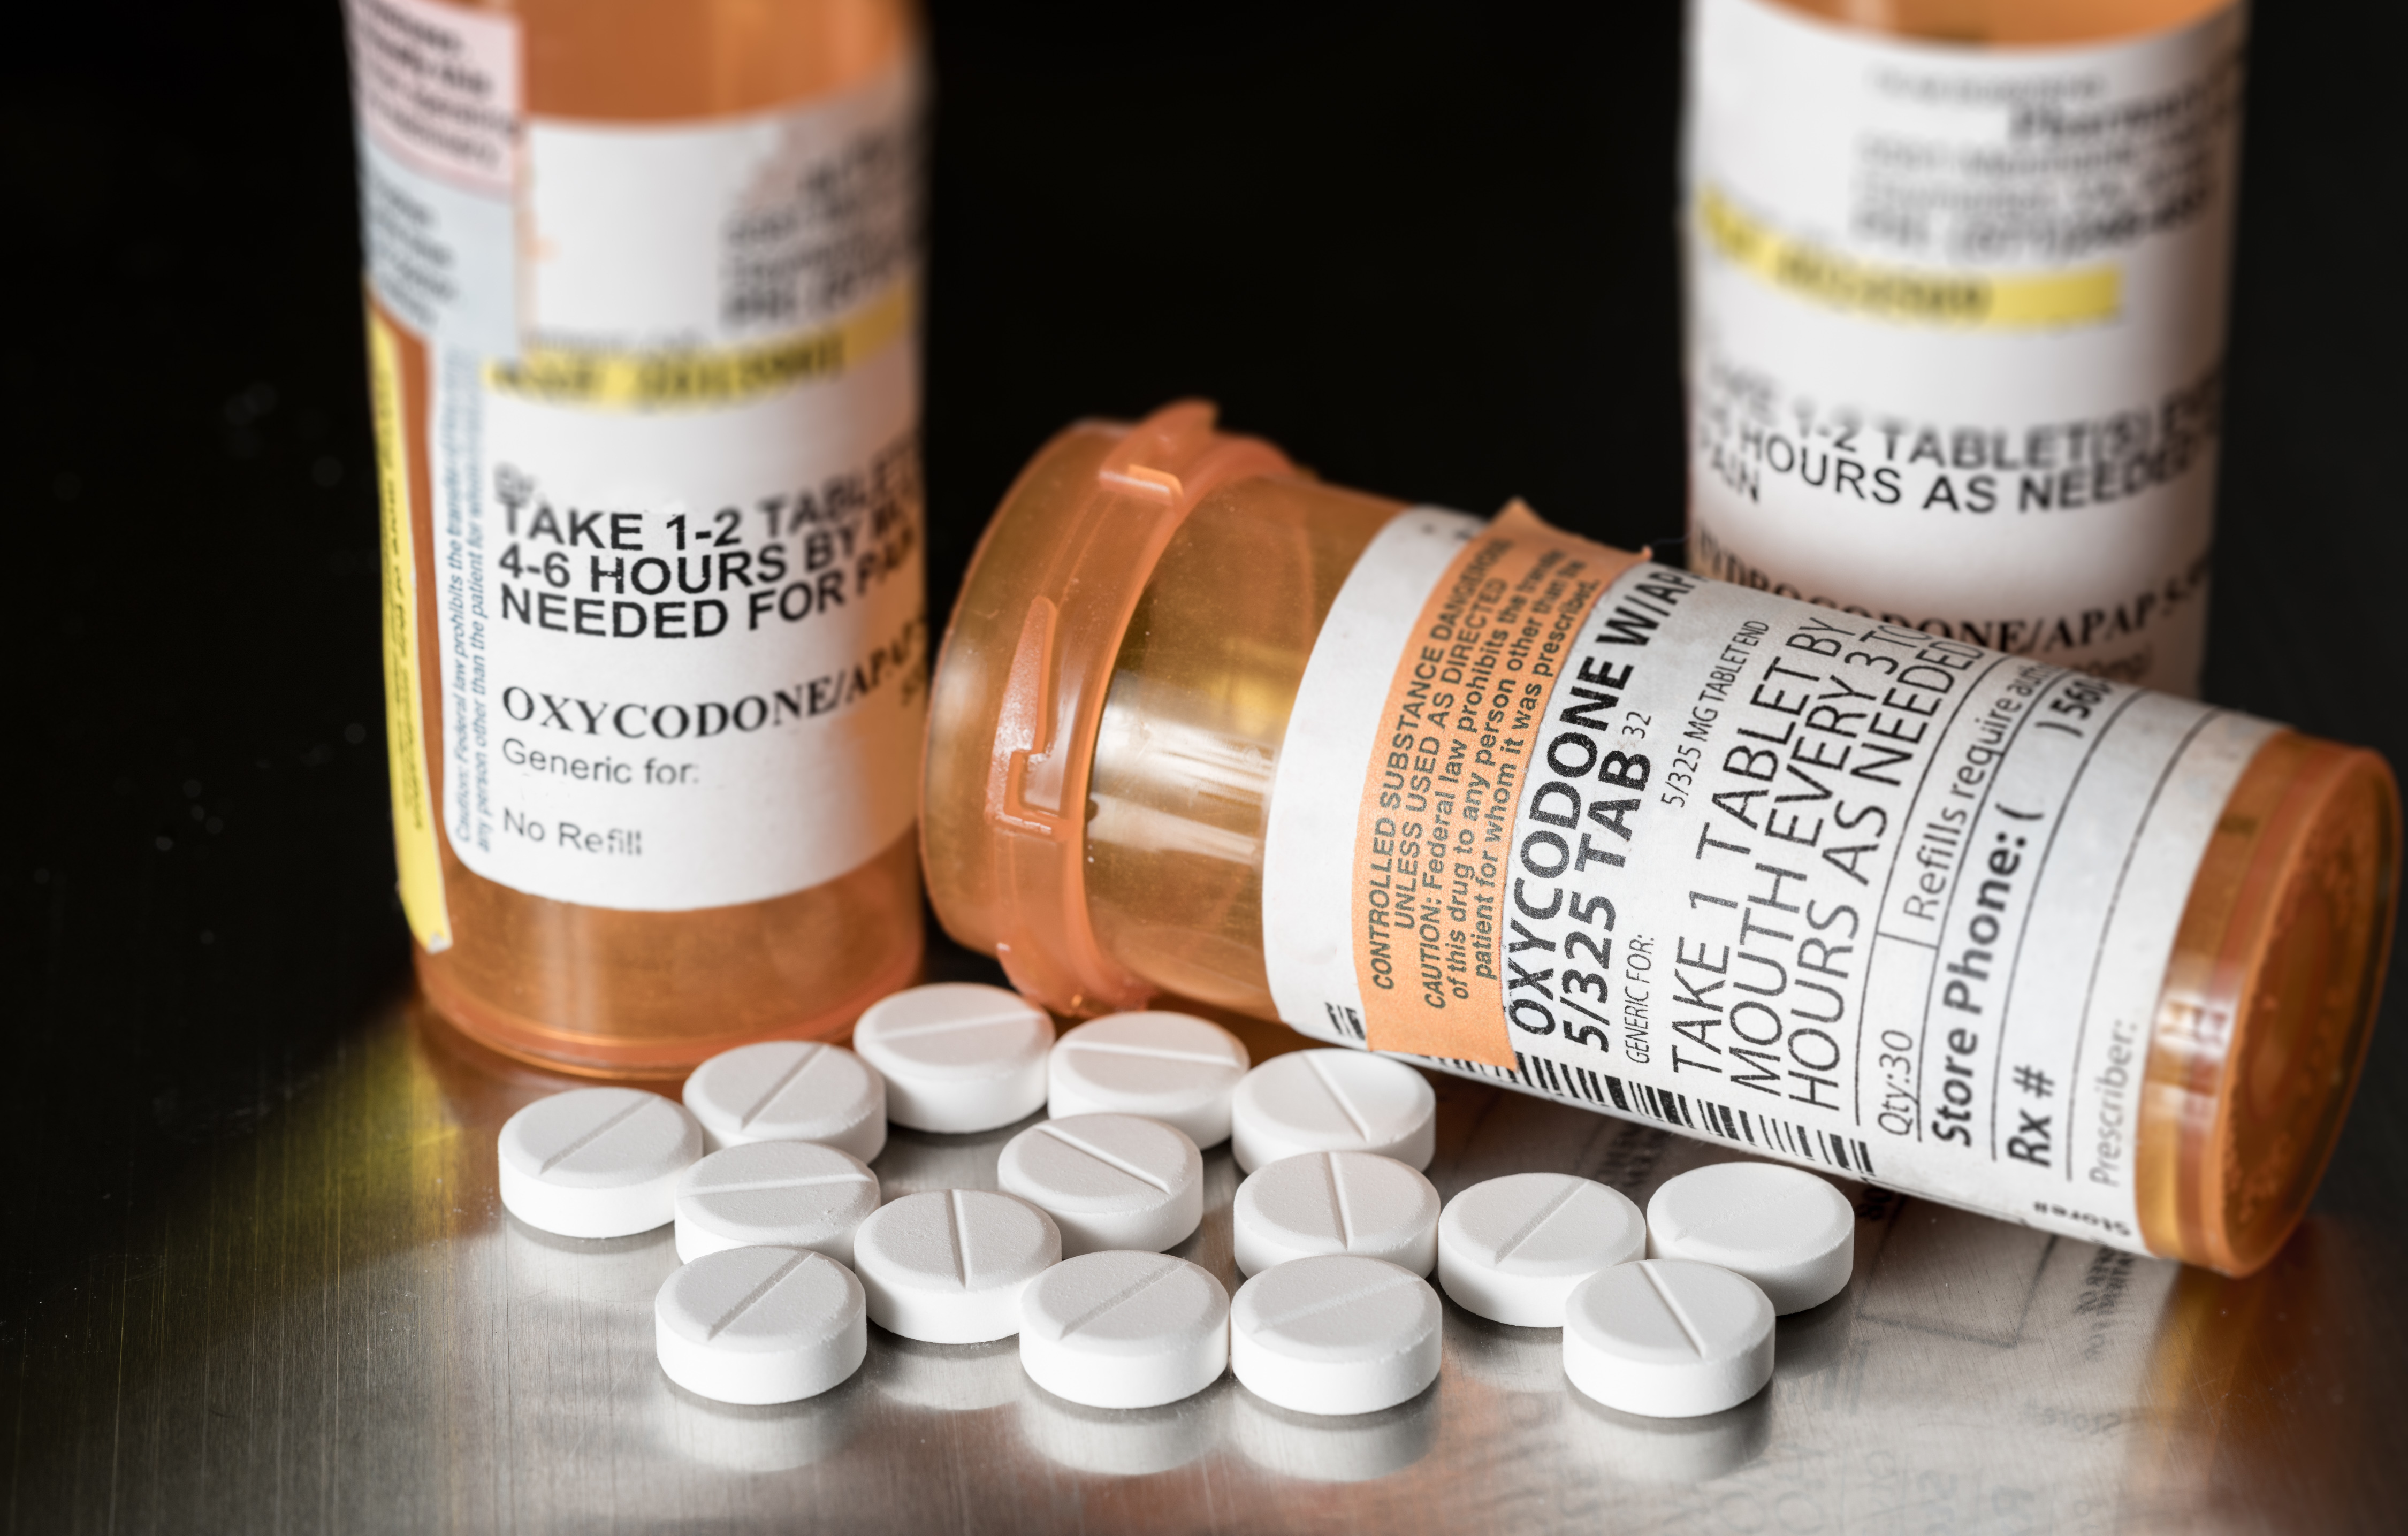 Oxycodone is the generic name for a range of opoid pain killing tablets. Prescription bottle for Oxycodone tablets and pills on metal table for opioid epidemic illustration. (Shutterstock/Steve Heap)